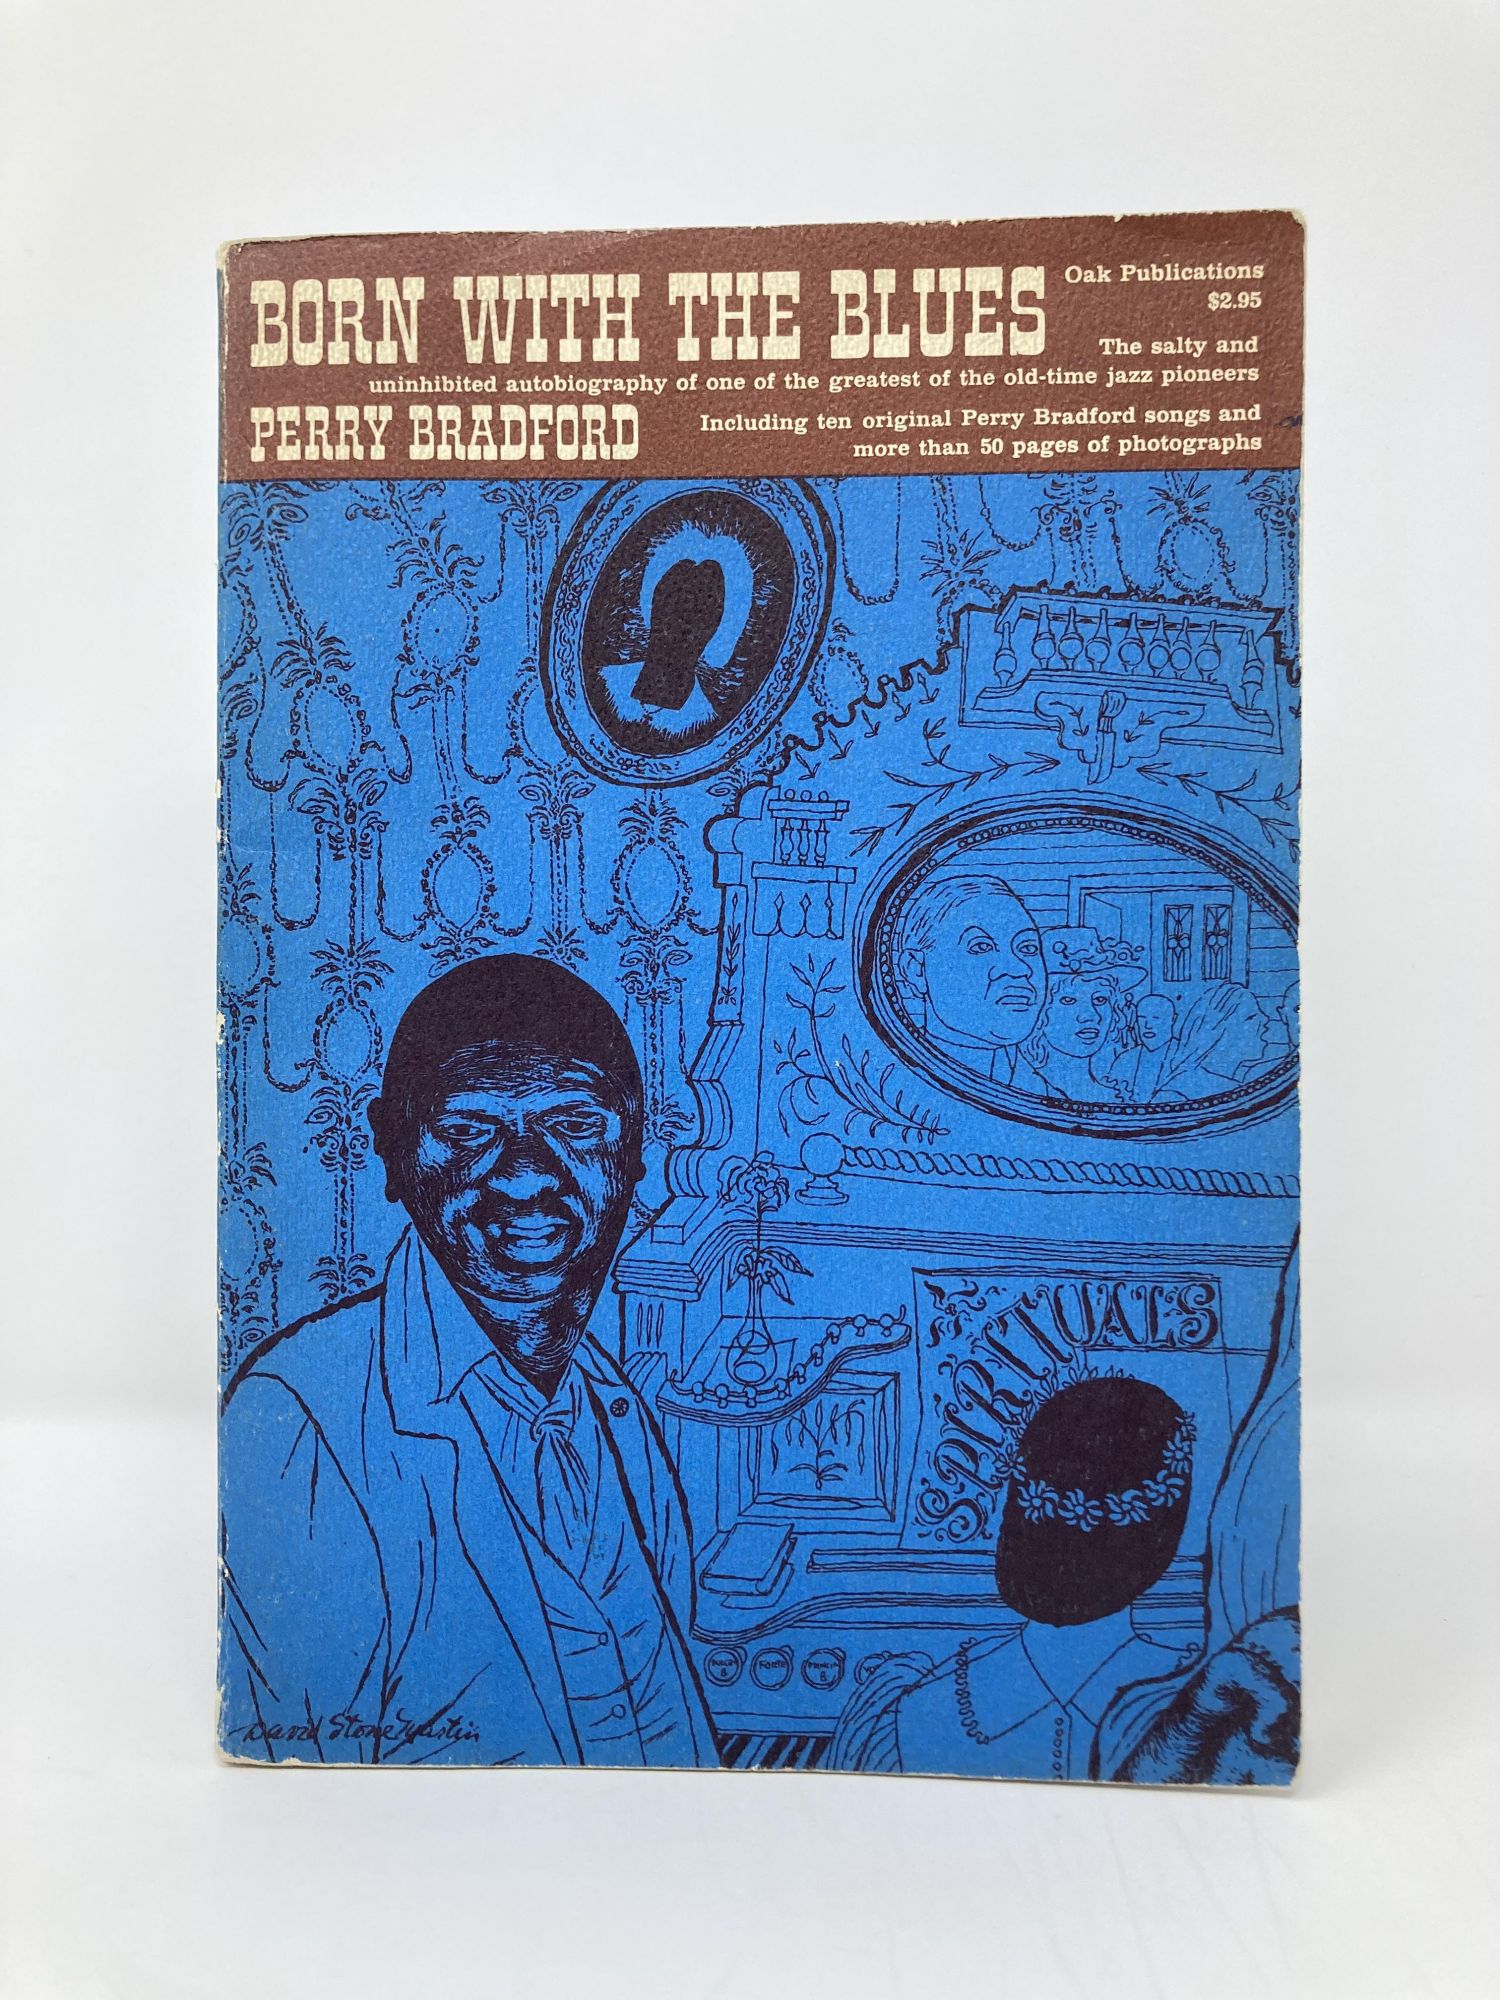 Born with the Blues by Perry Bradford on Sag Harbor Books